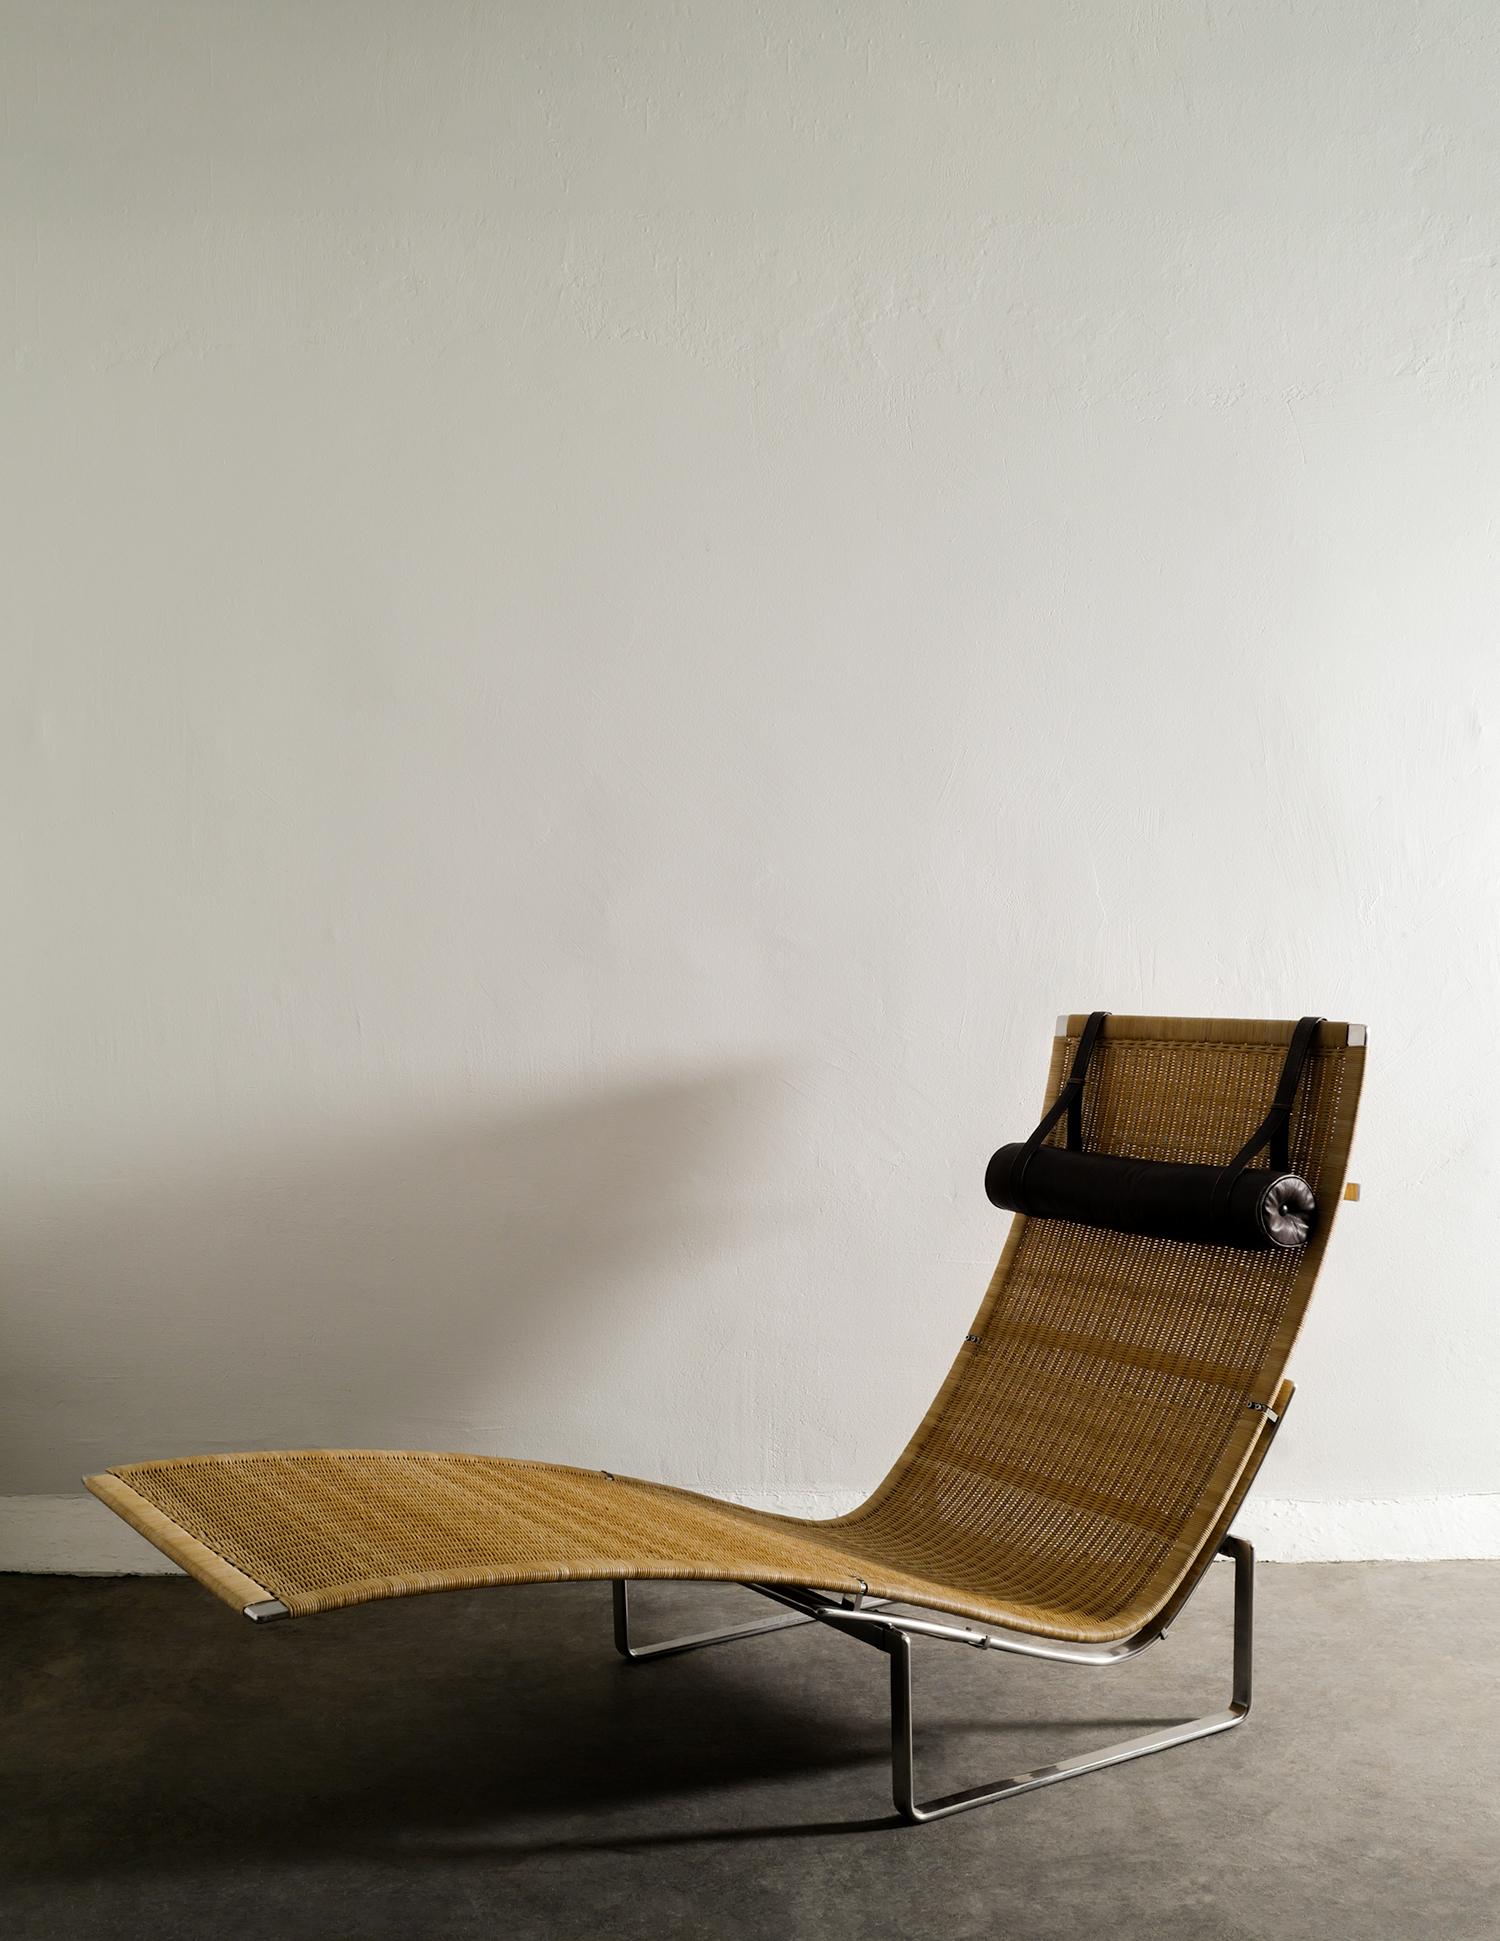 Very rare and great example of this midcentury iconic chaise lounge chair by Poul Kjærholm produced by E. Kold Christensen acquired from the original owner. In great vintage and original condition with patina and light signs from age and use.